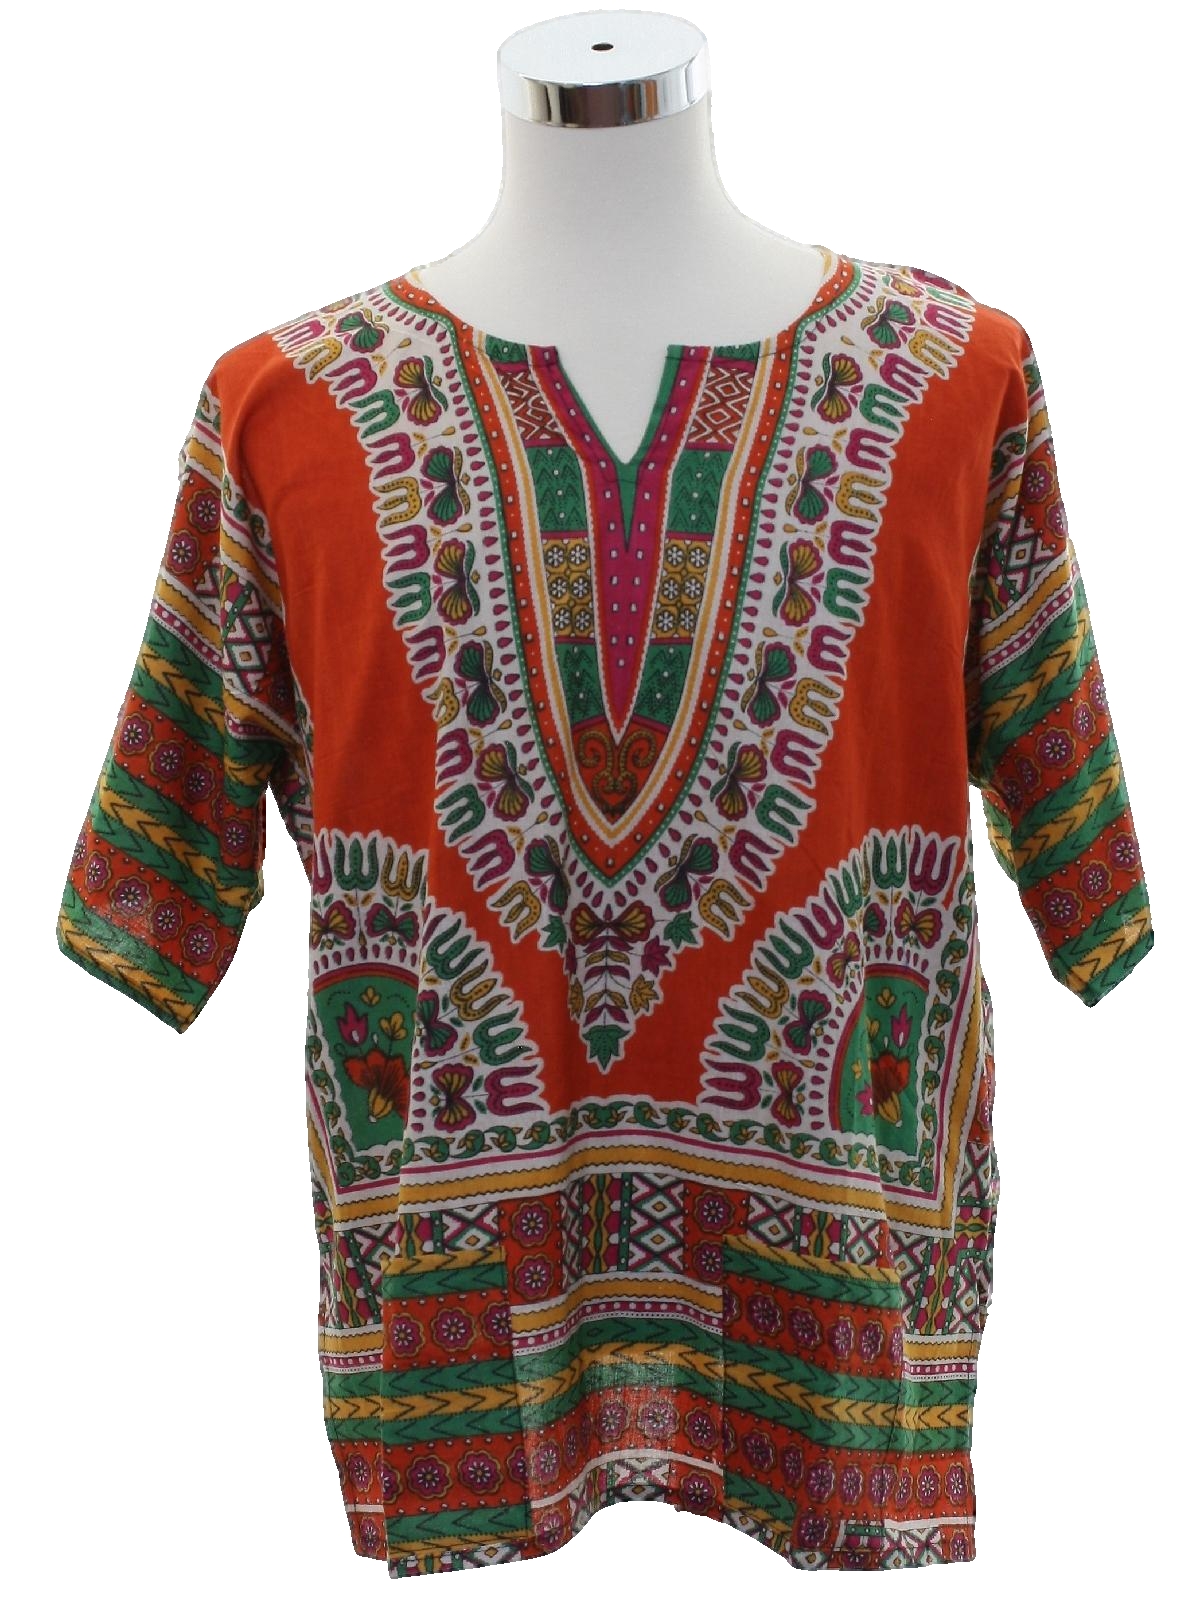 Vintage 70s Hippie Shirt: 70s style (made recently) -No Label- Unisex ...